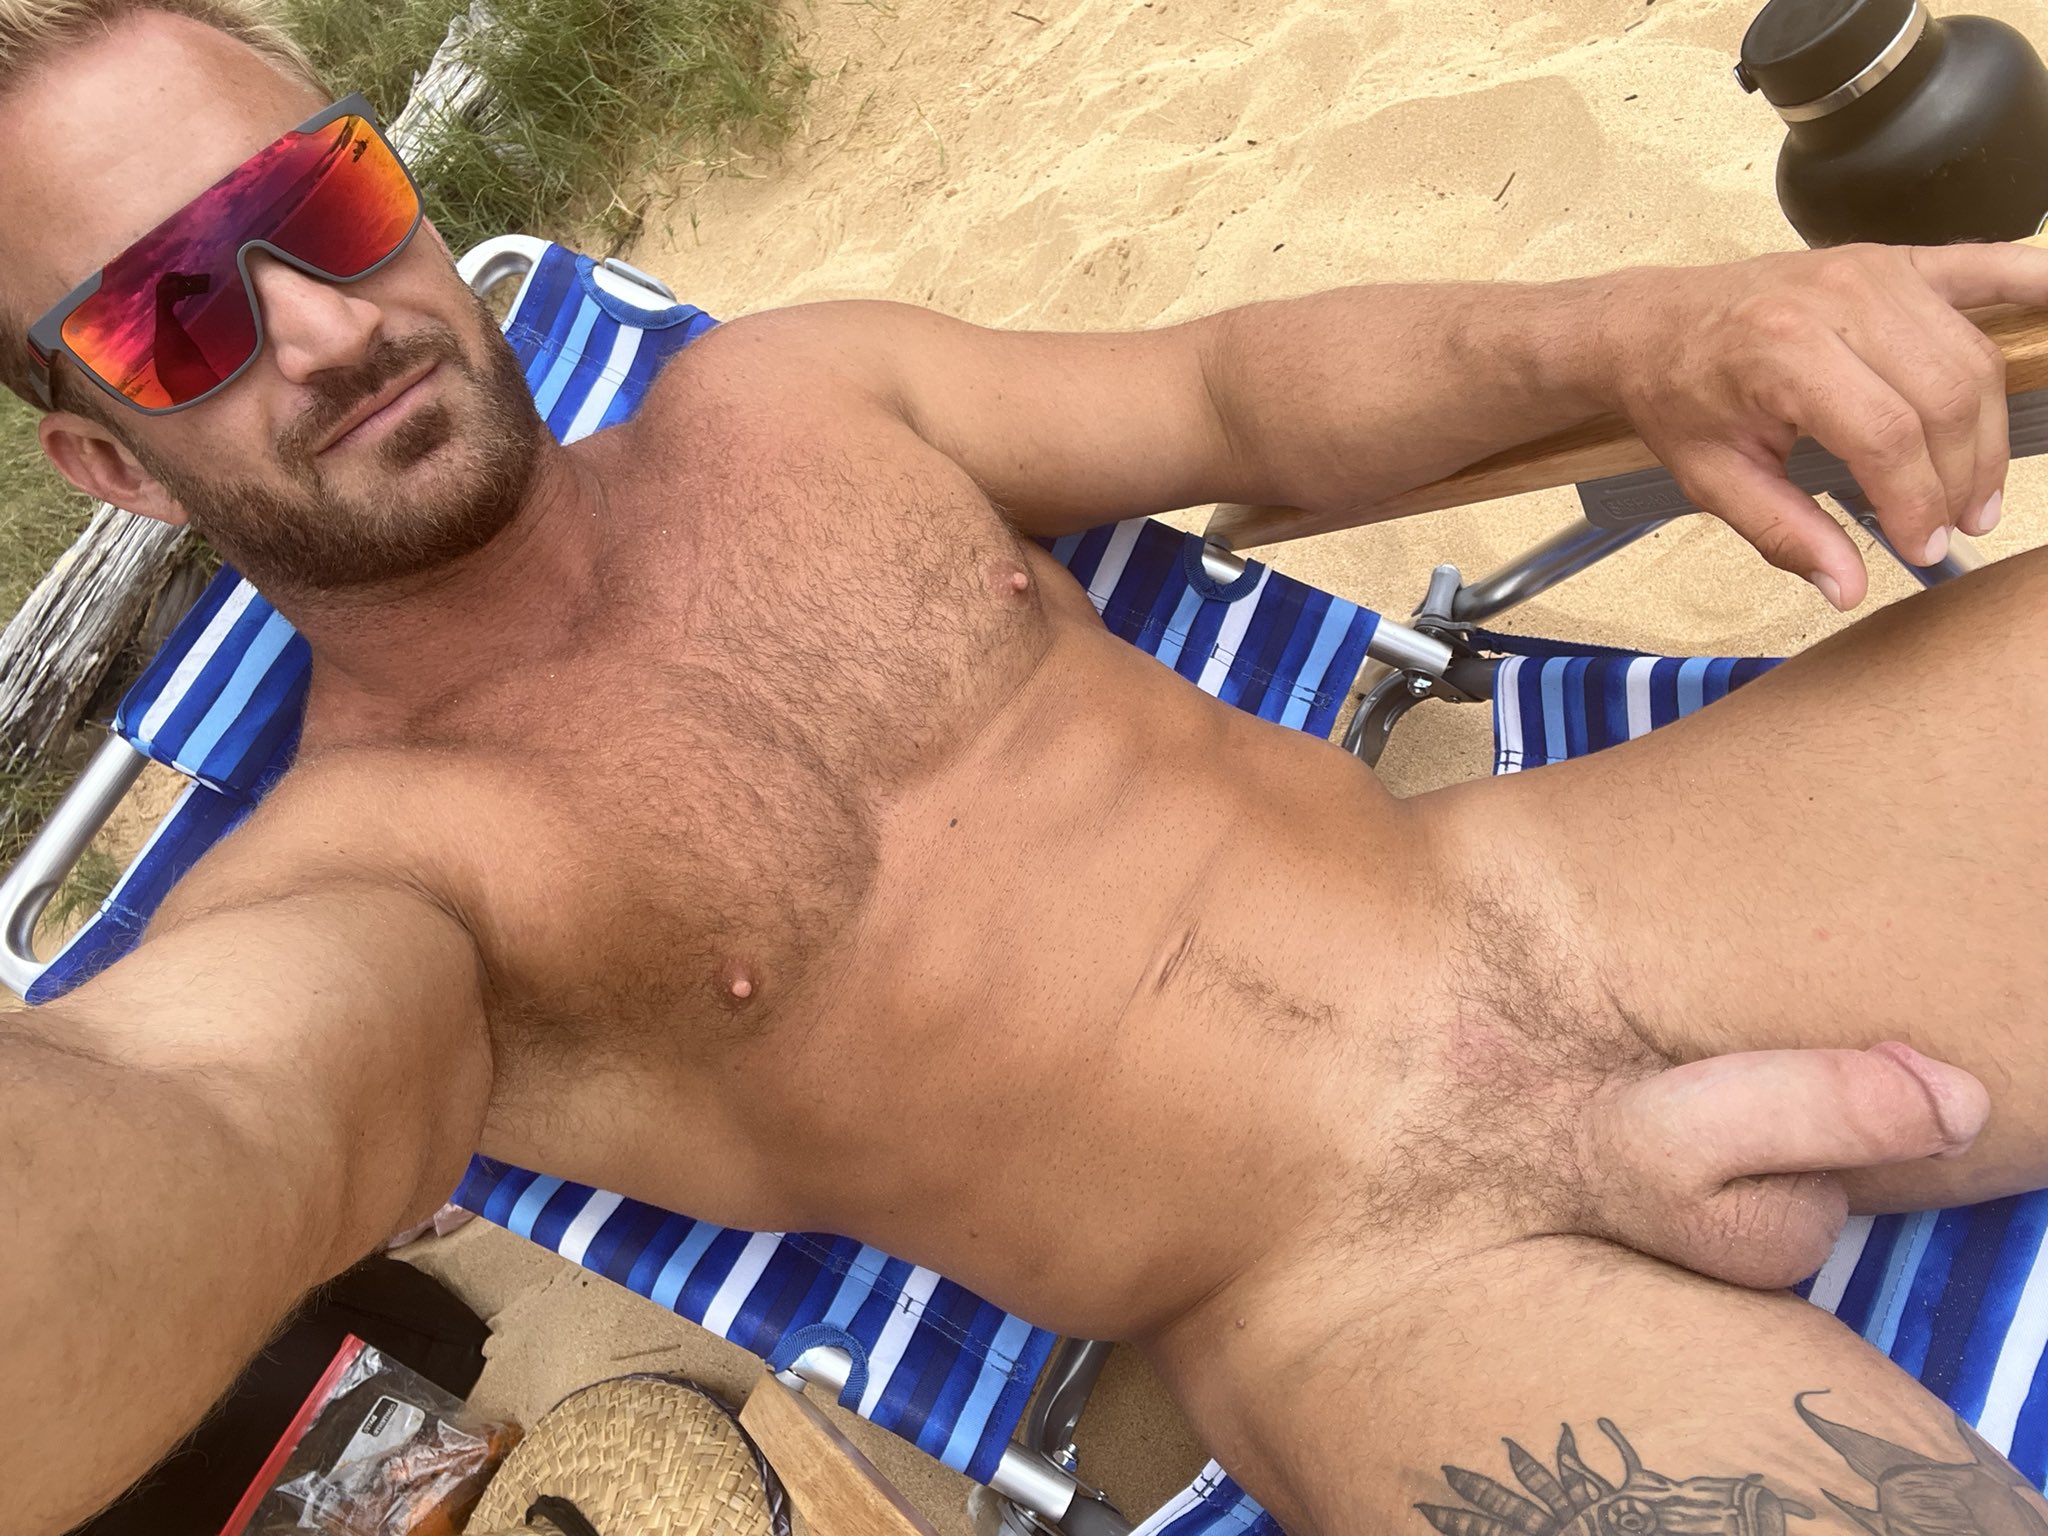 squirt studios star bruce jones sitting naked in a beach chair on a gay male vacation